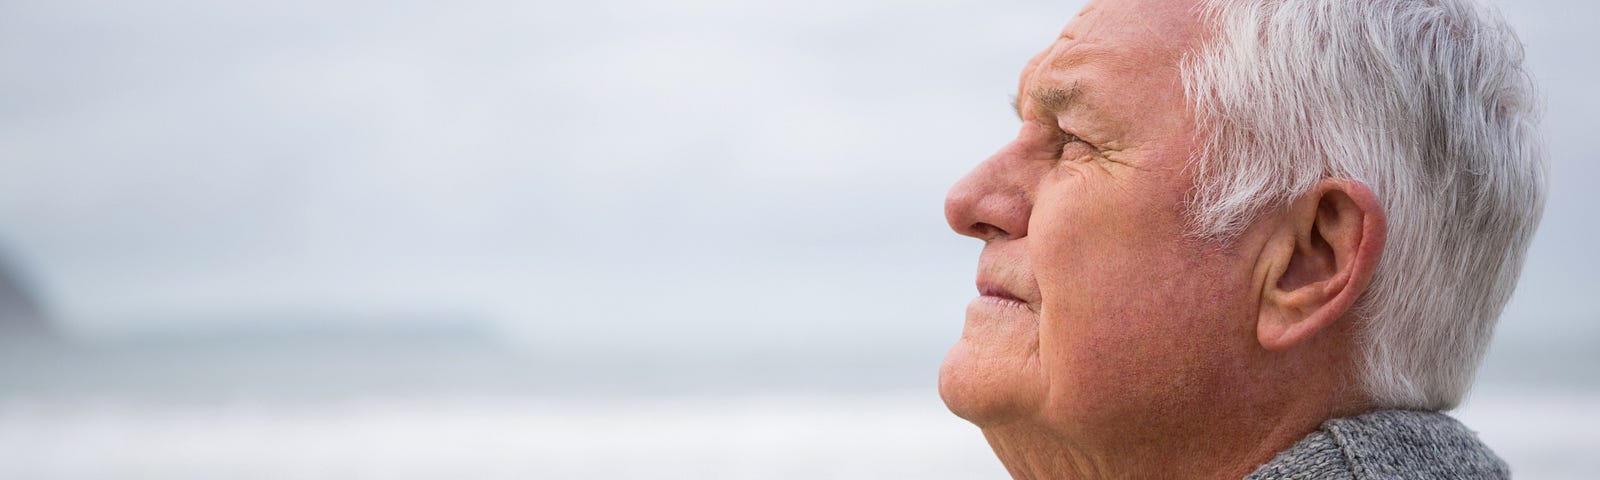 Older man staring out into unfocused and reflecting on thoughts